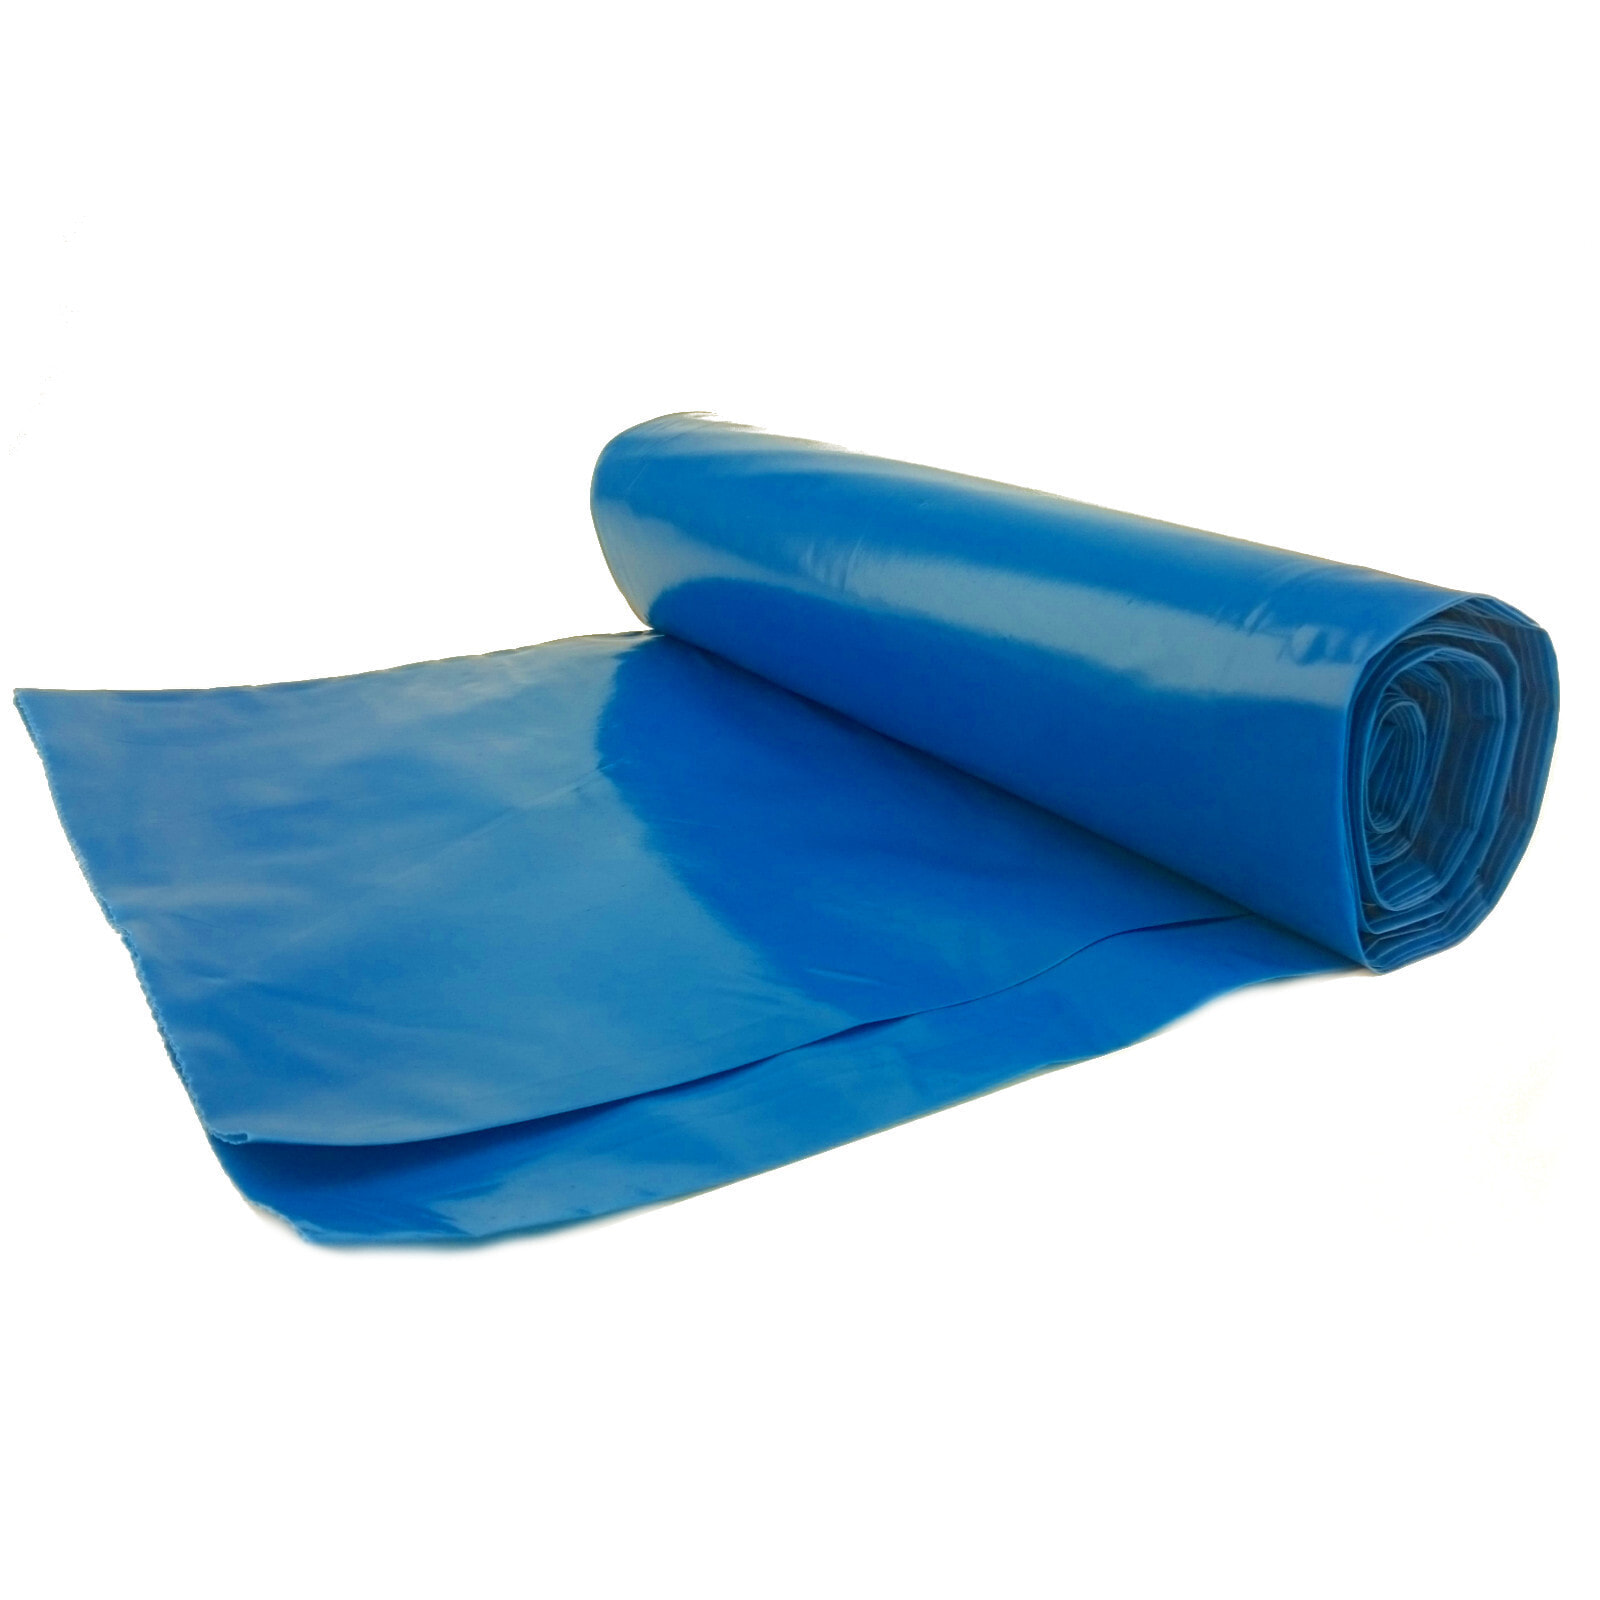 80 micron thick garbage bags. durable roll 5 pcs. - blue 240L